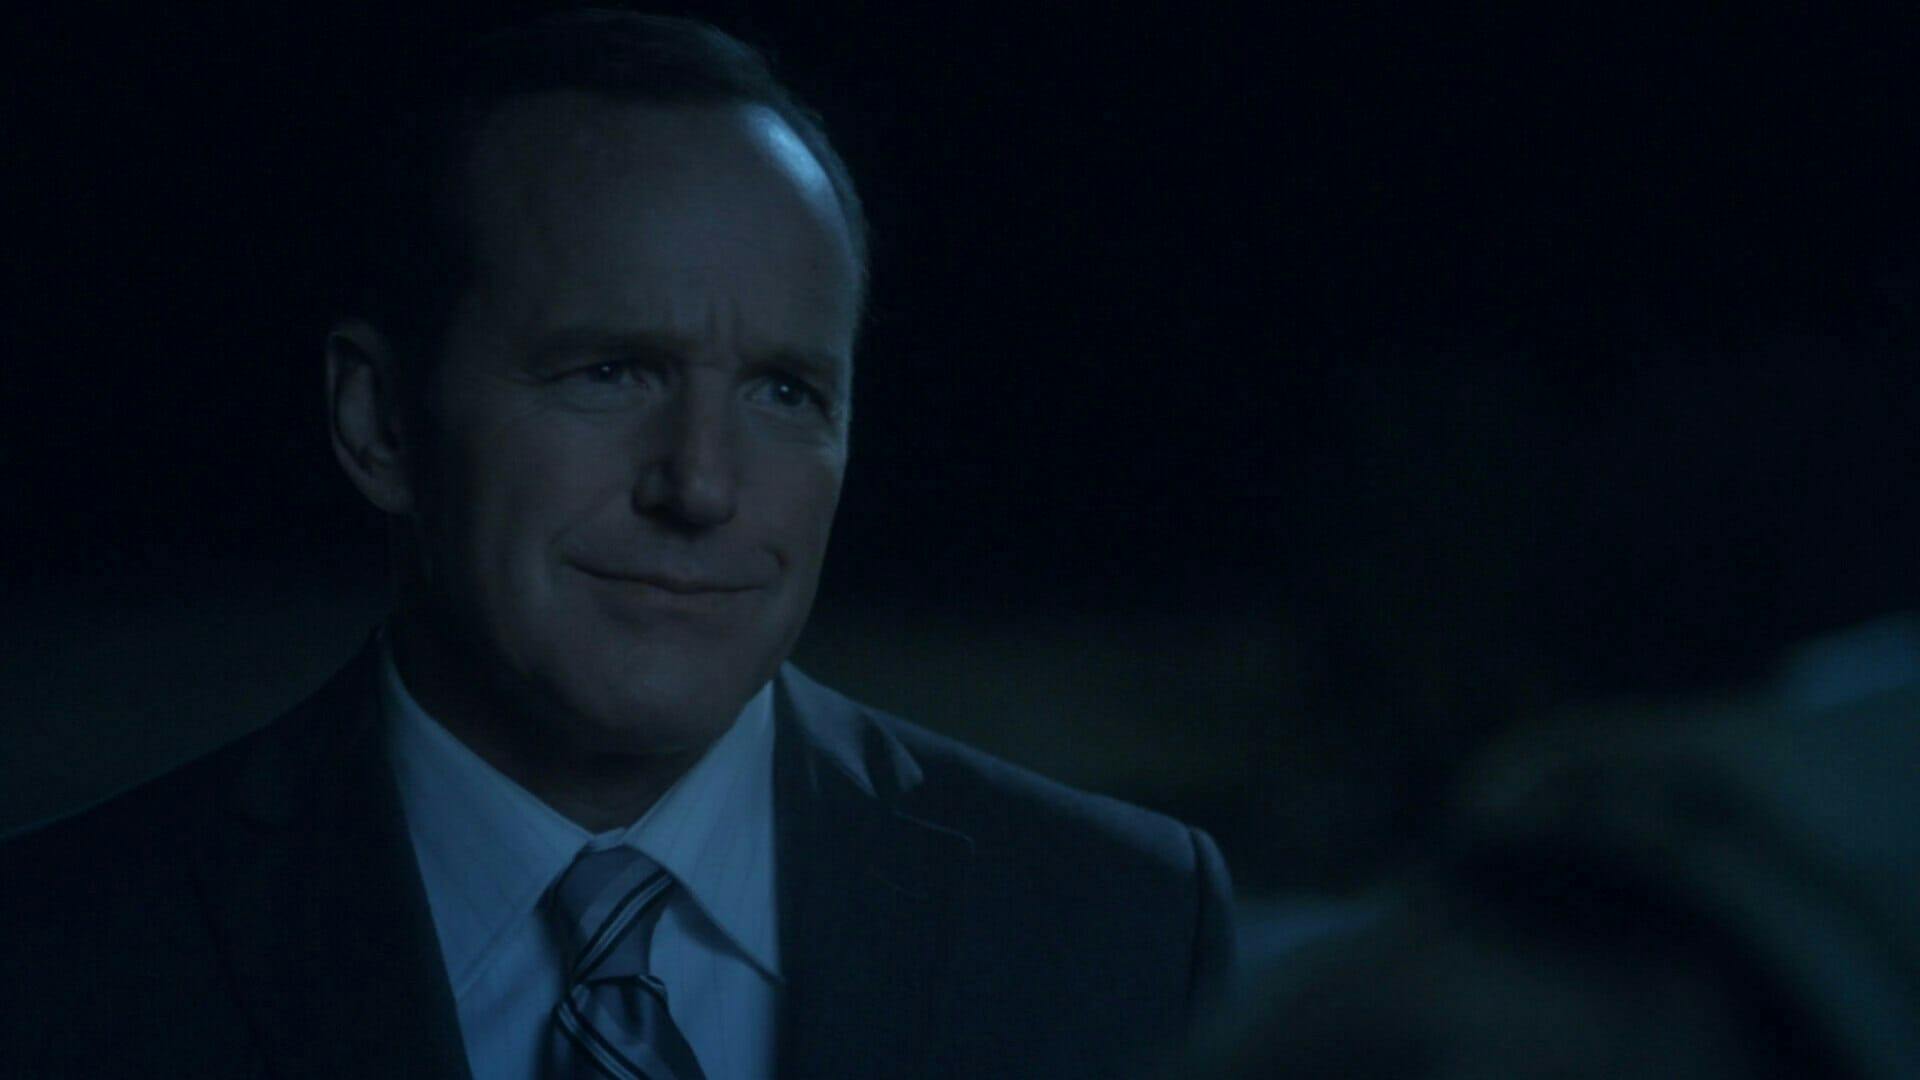 captain marvel will be an origin story for agent coulson